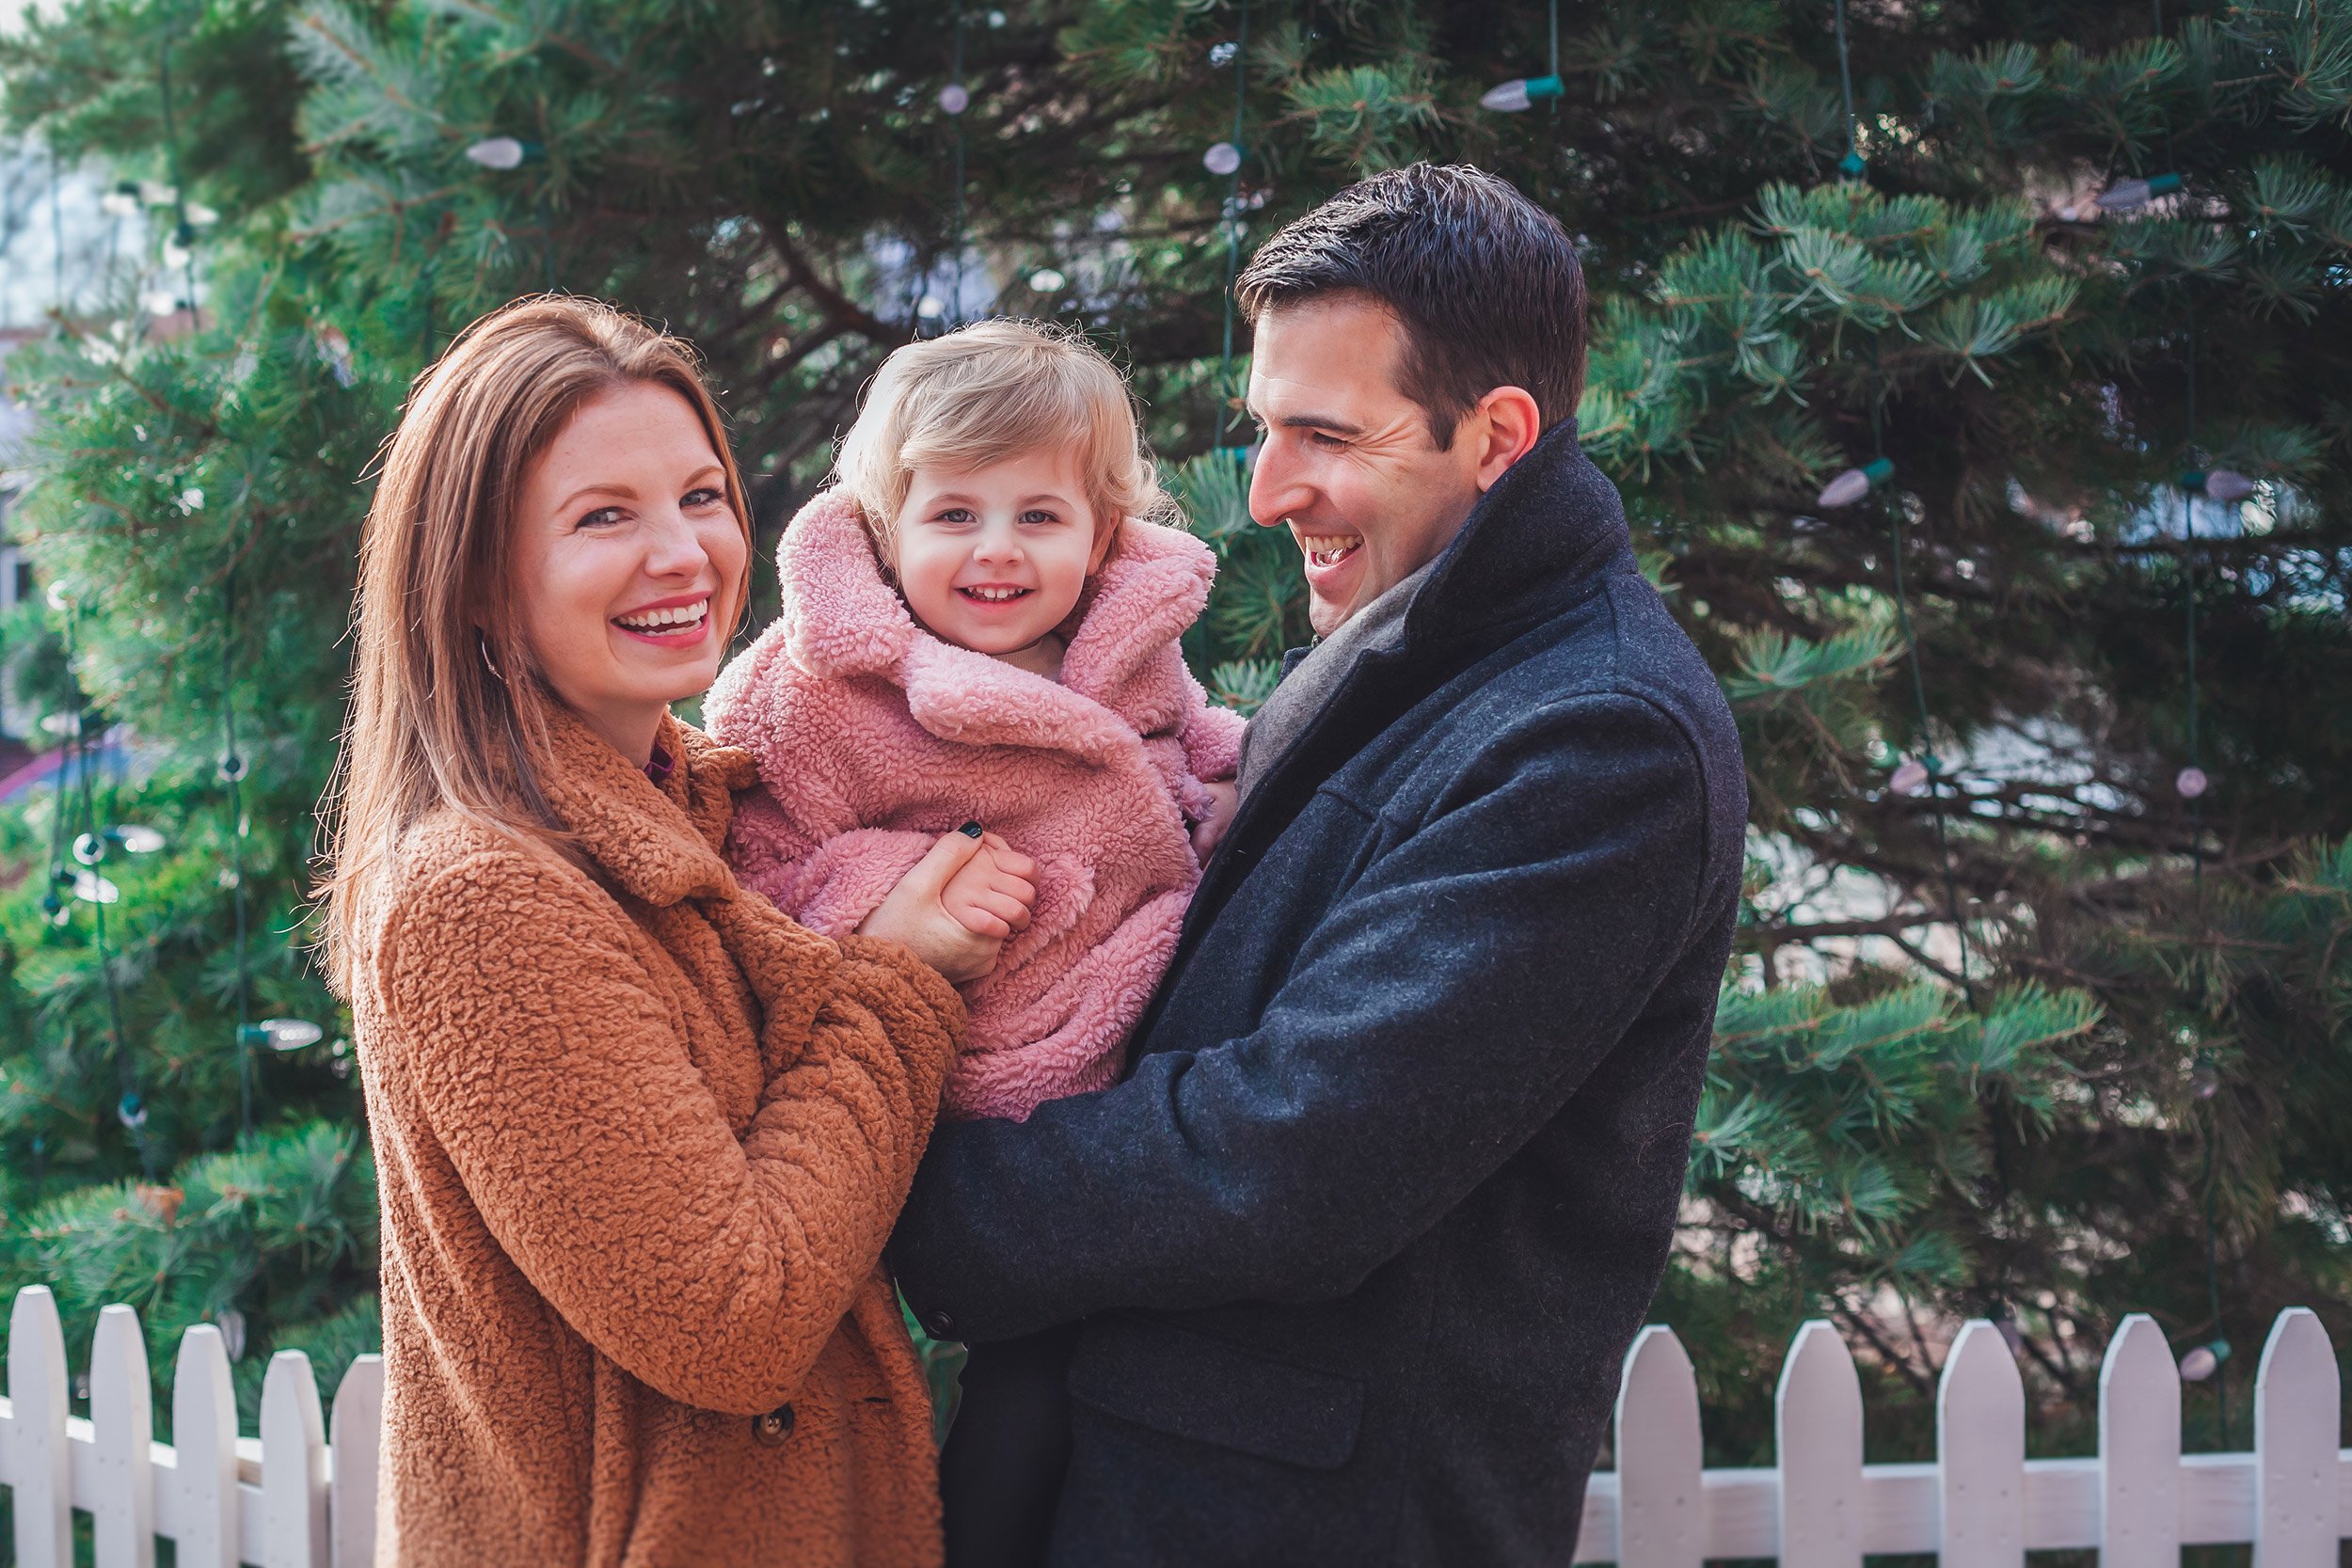 Amesbury Family Portrait Session - Stephen Grant Photography